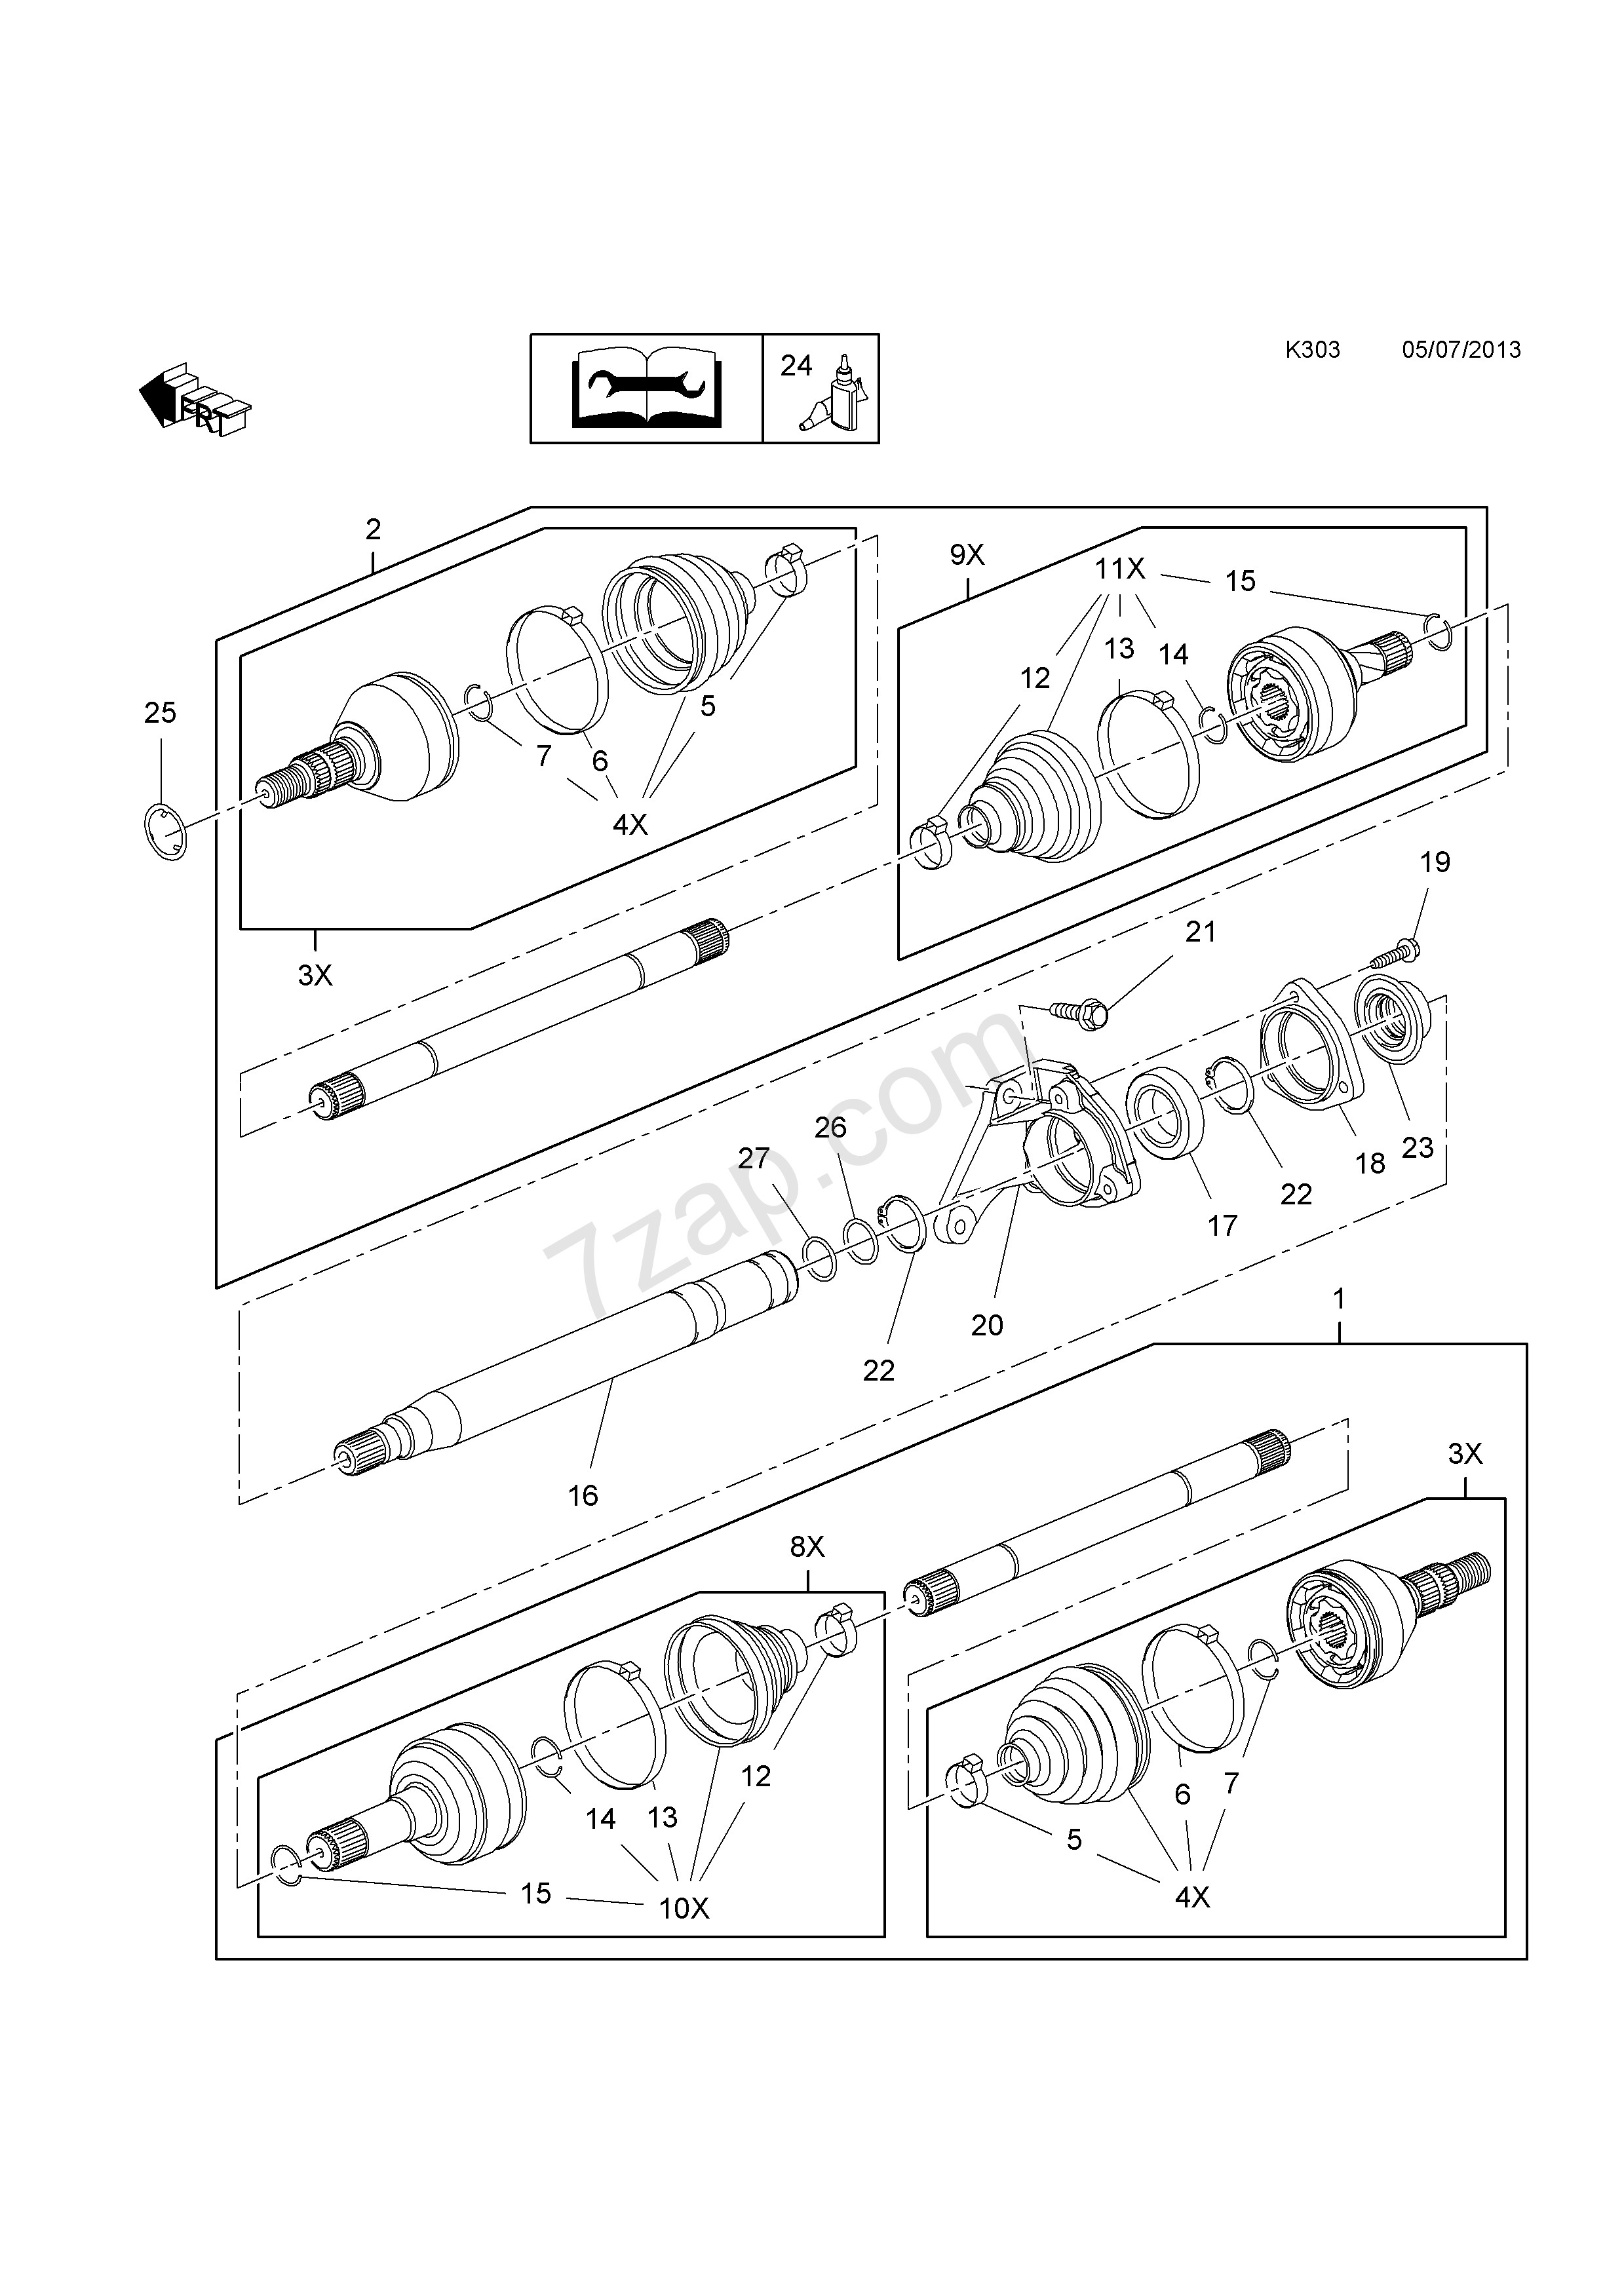 Front Wheel Drive Transmission Diagram Front Axle Drive Shaft [used with M32 Manual Transmission A20dtc Of Front Wheel Drive Transmission Diagram